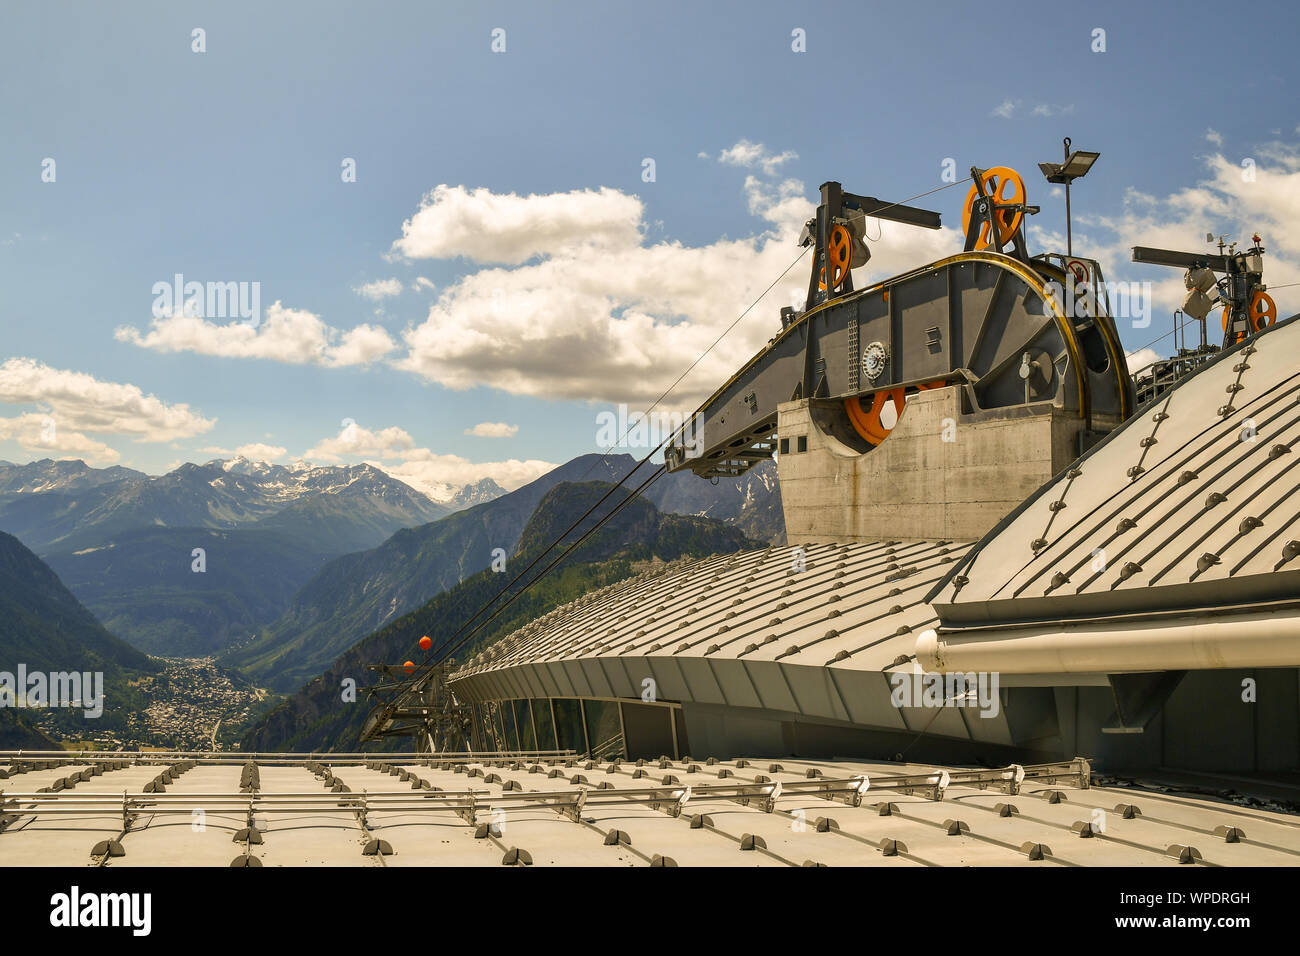 Details of the engineering mechanism of the Pavillon cableway station of the Skyway Monte Bianco above the valley of Courmayeur, Aosta, Alps, Italy Stock Photo